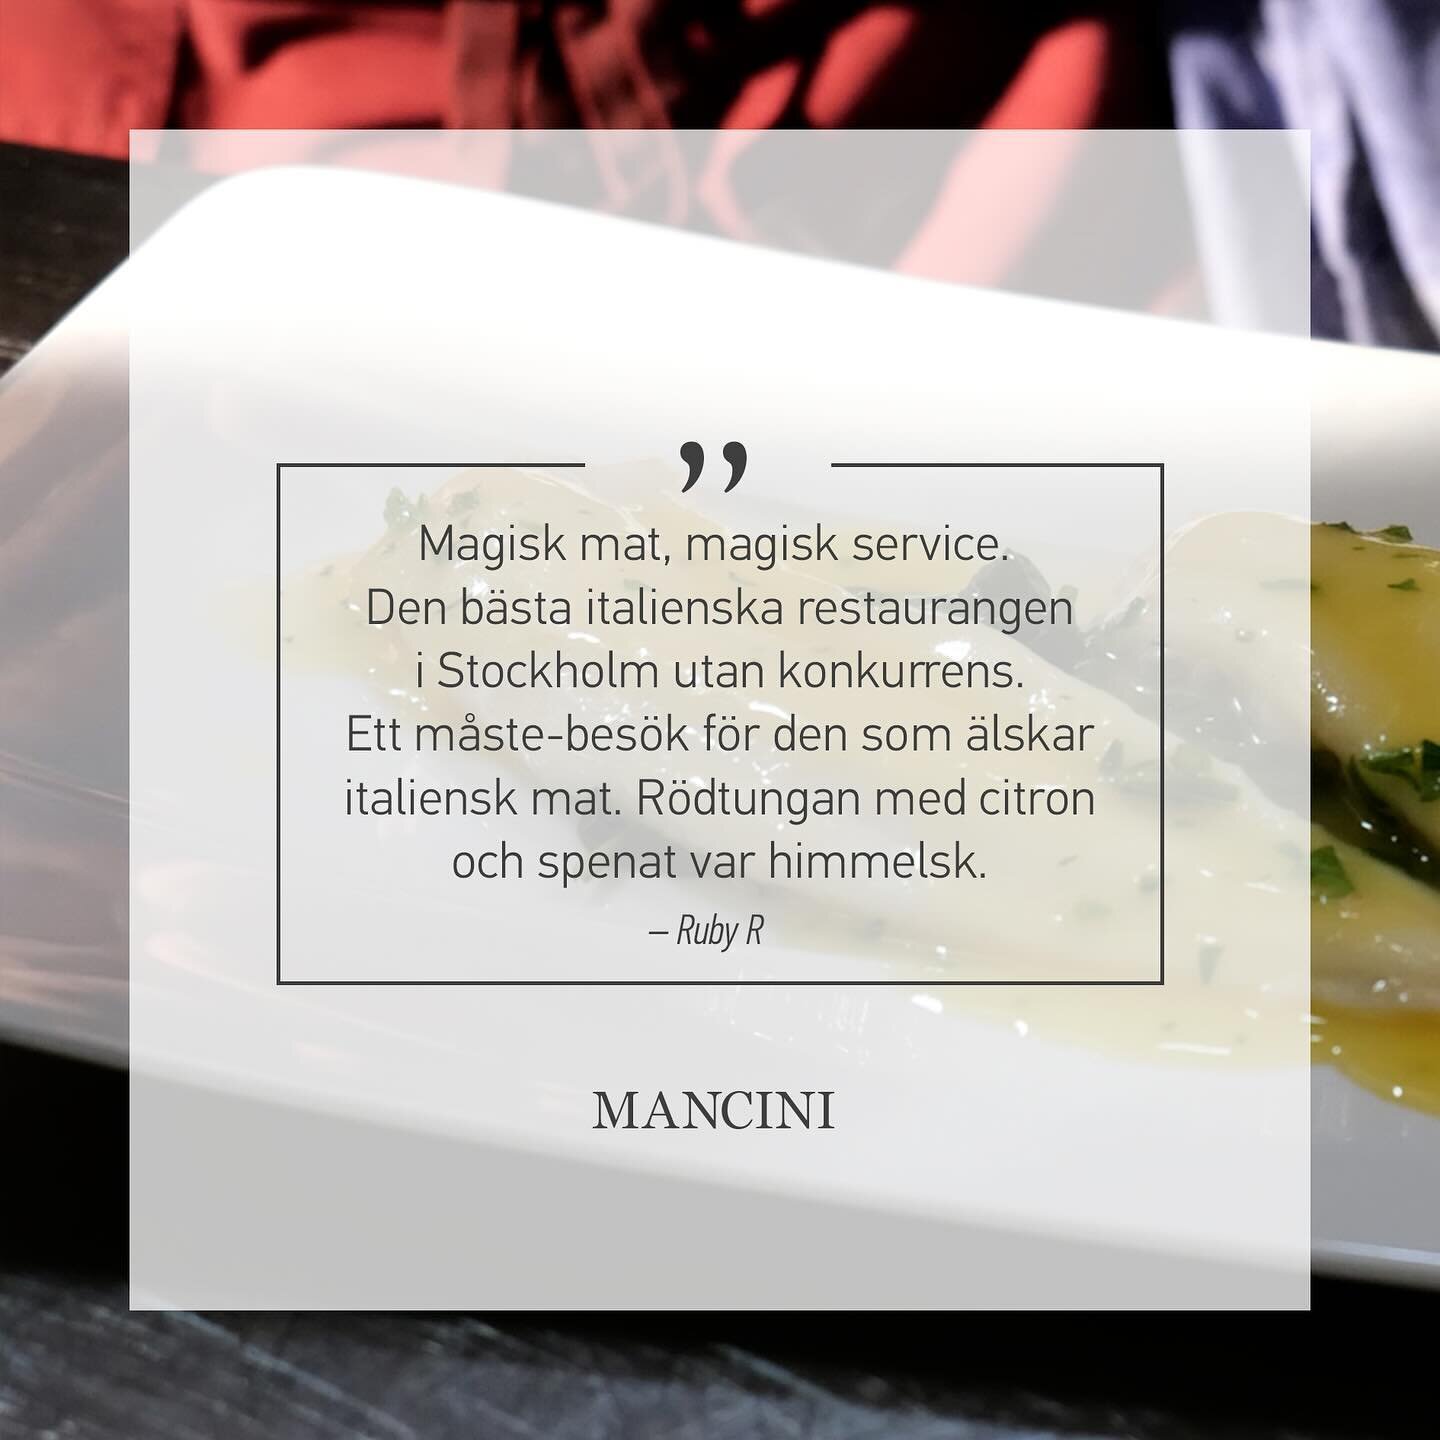 We are really happy to receive such positive reviews from our guests. At Mancini, every detail is in focus and our main priority is to ensure that our guests are comfortable and that your dining experience is something extraordinary.

🇸🇪 &ldquo;Mag